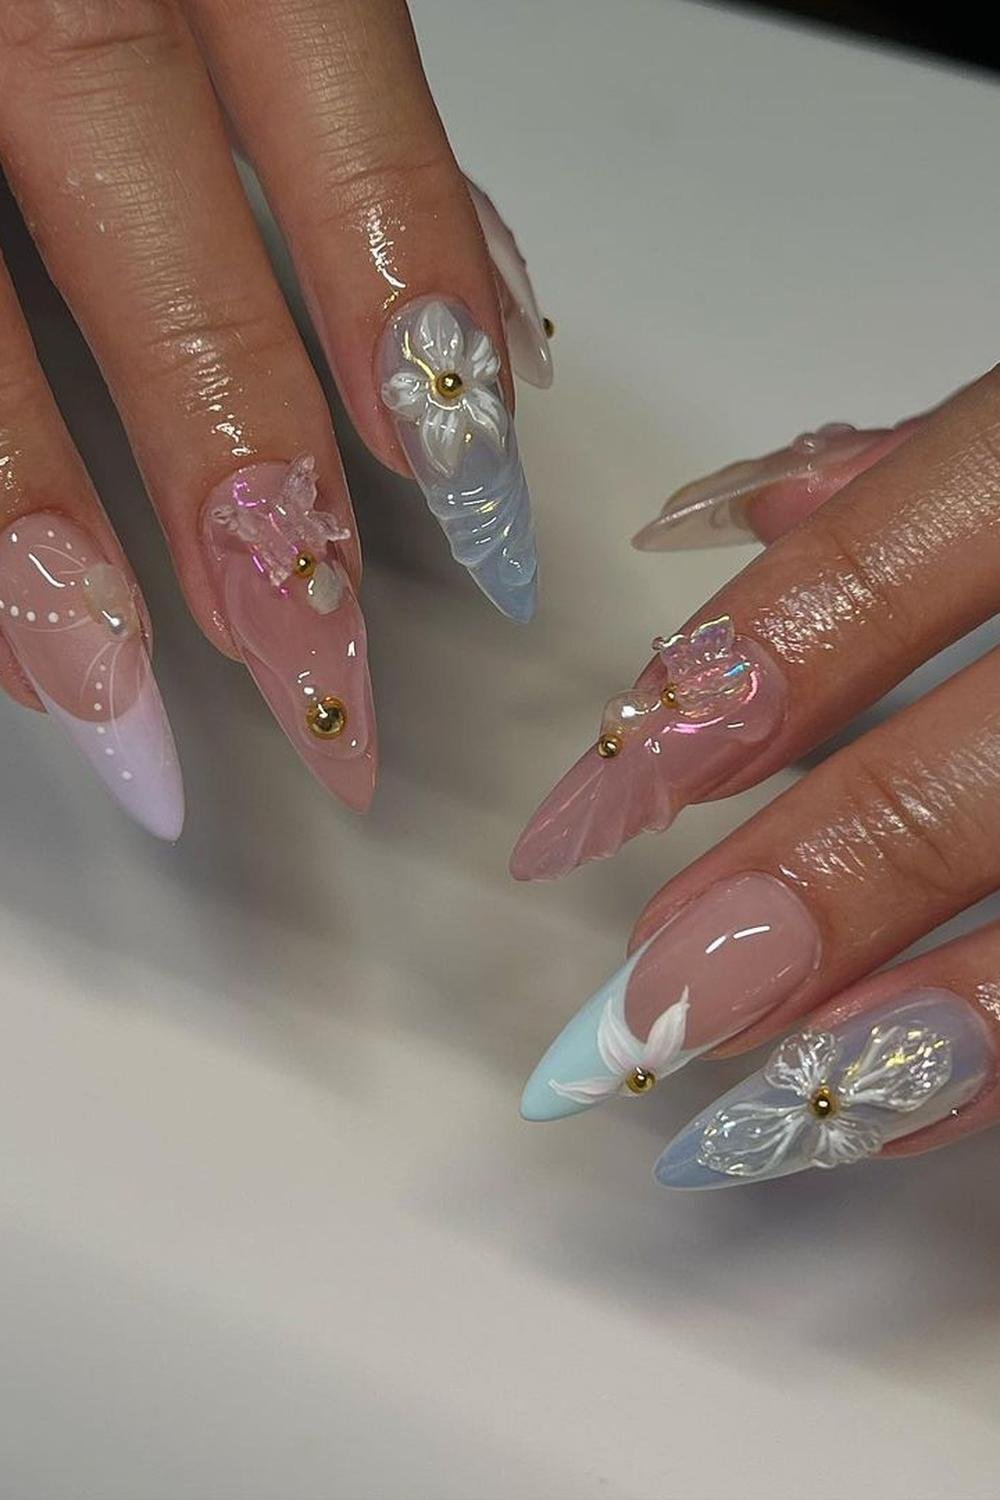 12 - Picture of Whimsical Nails